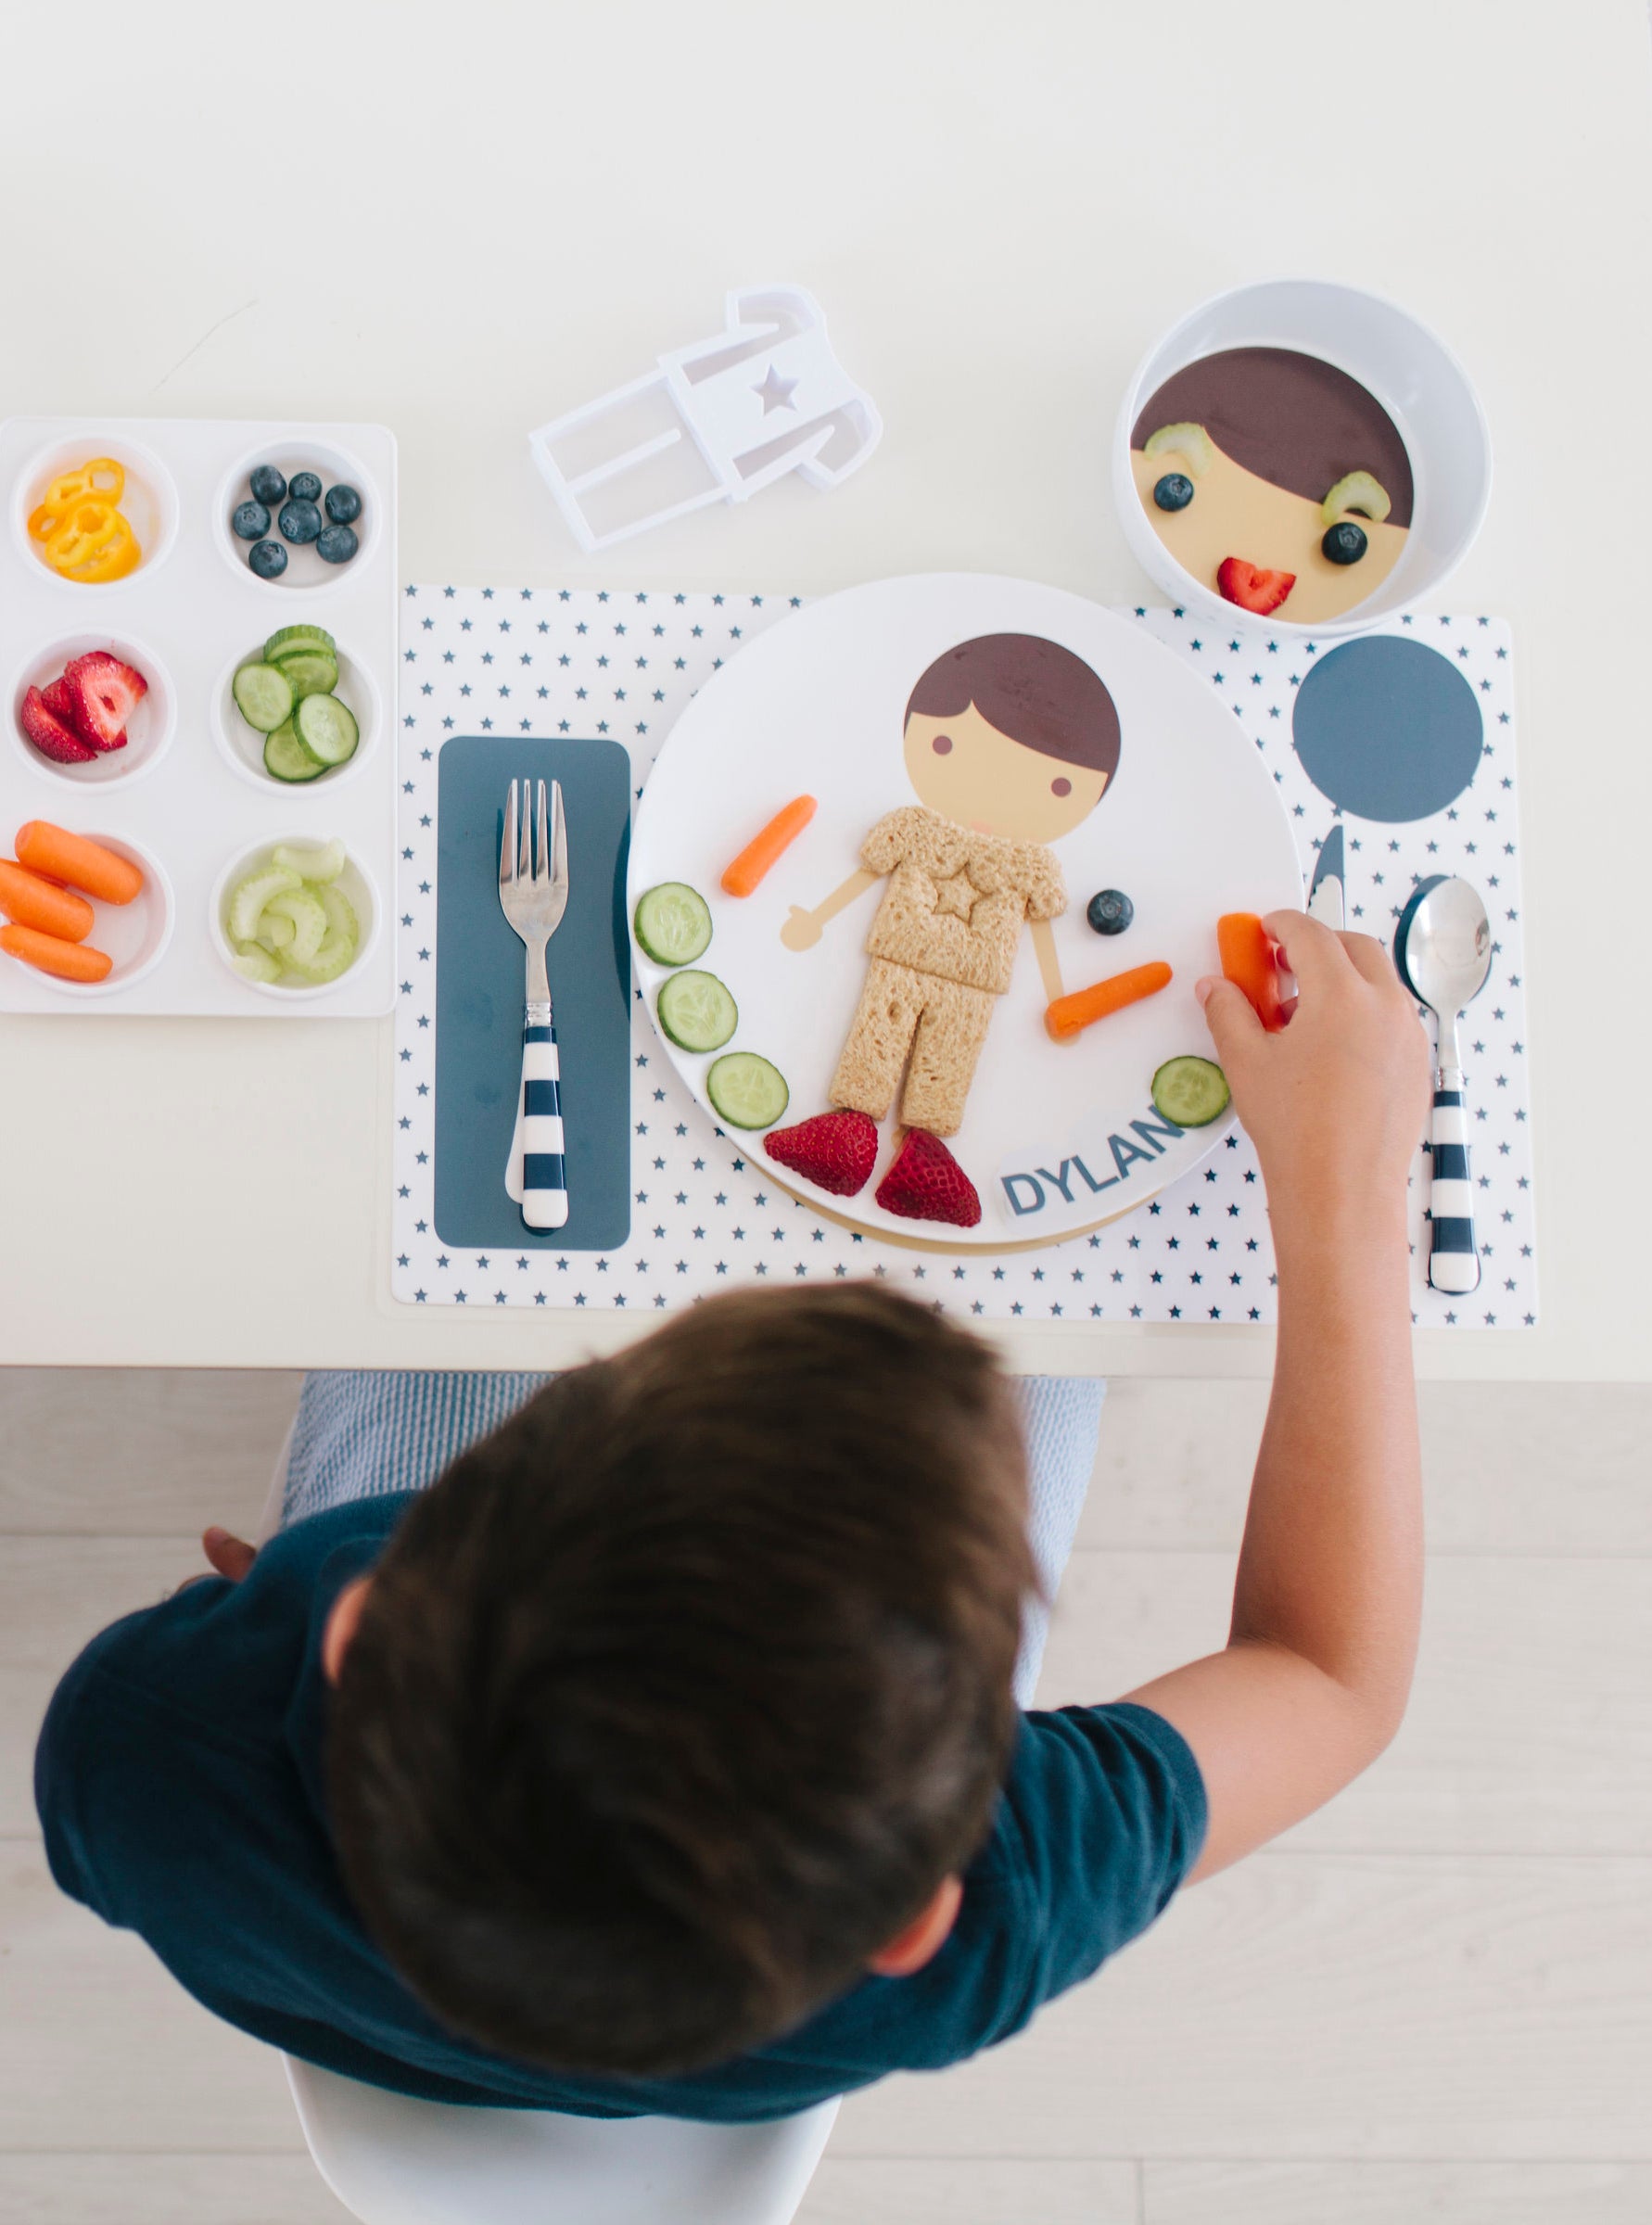 Dylbug Completely Customizable Dishes for Kids